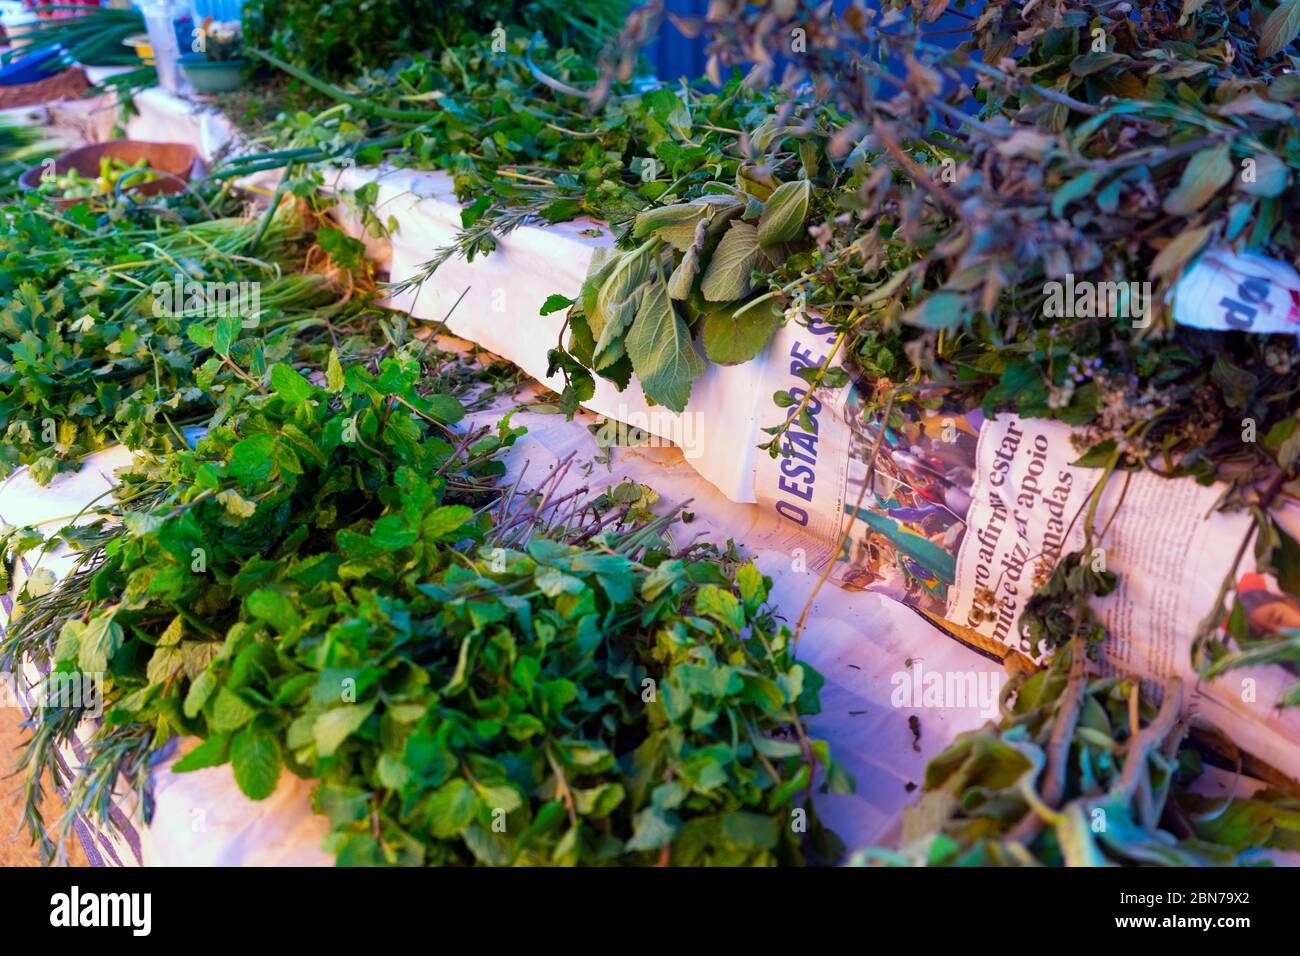 Fresh herbs for sale in an open air street market in Sao Paulo, Brazil, during the COVID19 corona crisis in May 2020. Stock Photo